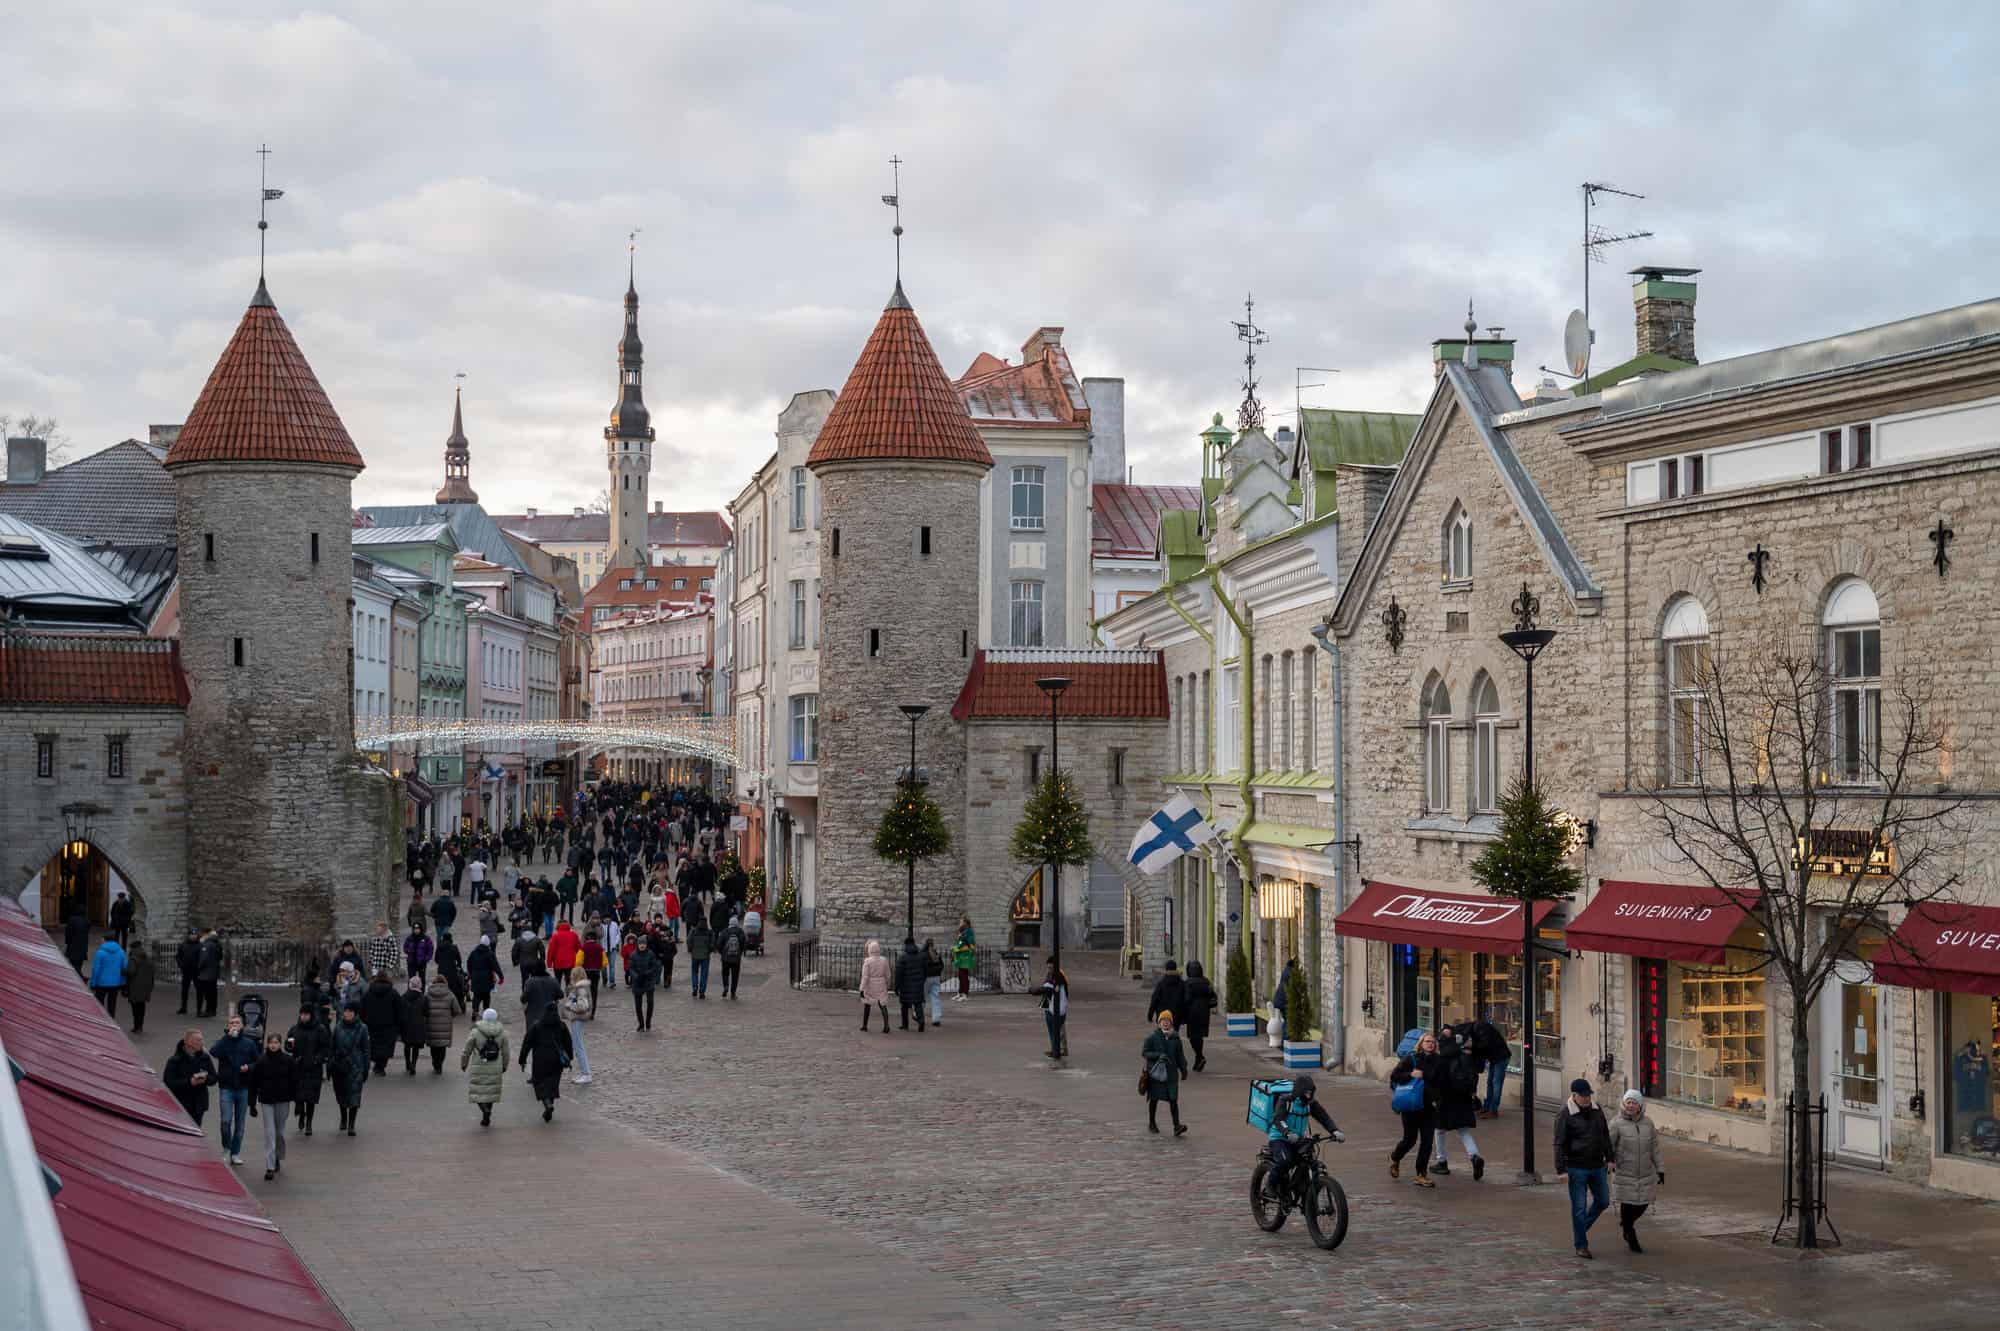 <p>Wandering the cobblestone lanes of Tallinn’s storybook Old Town makes you feel like you’ve stepped into medieval Europe. This is the first time I’ve encountered such a well-preserved historic capital. Dropping into candlelit cellar taverns and sampling hearty Estonian fare gave everything an otherworldly feel.</p>